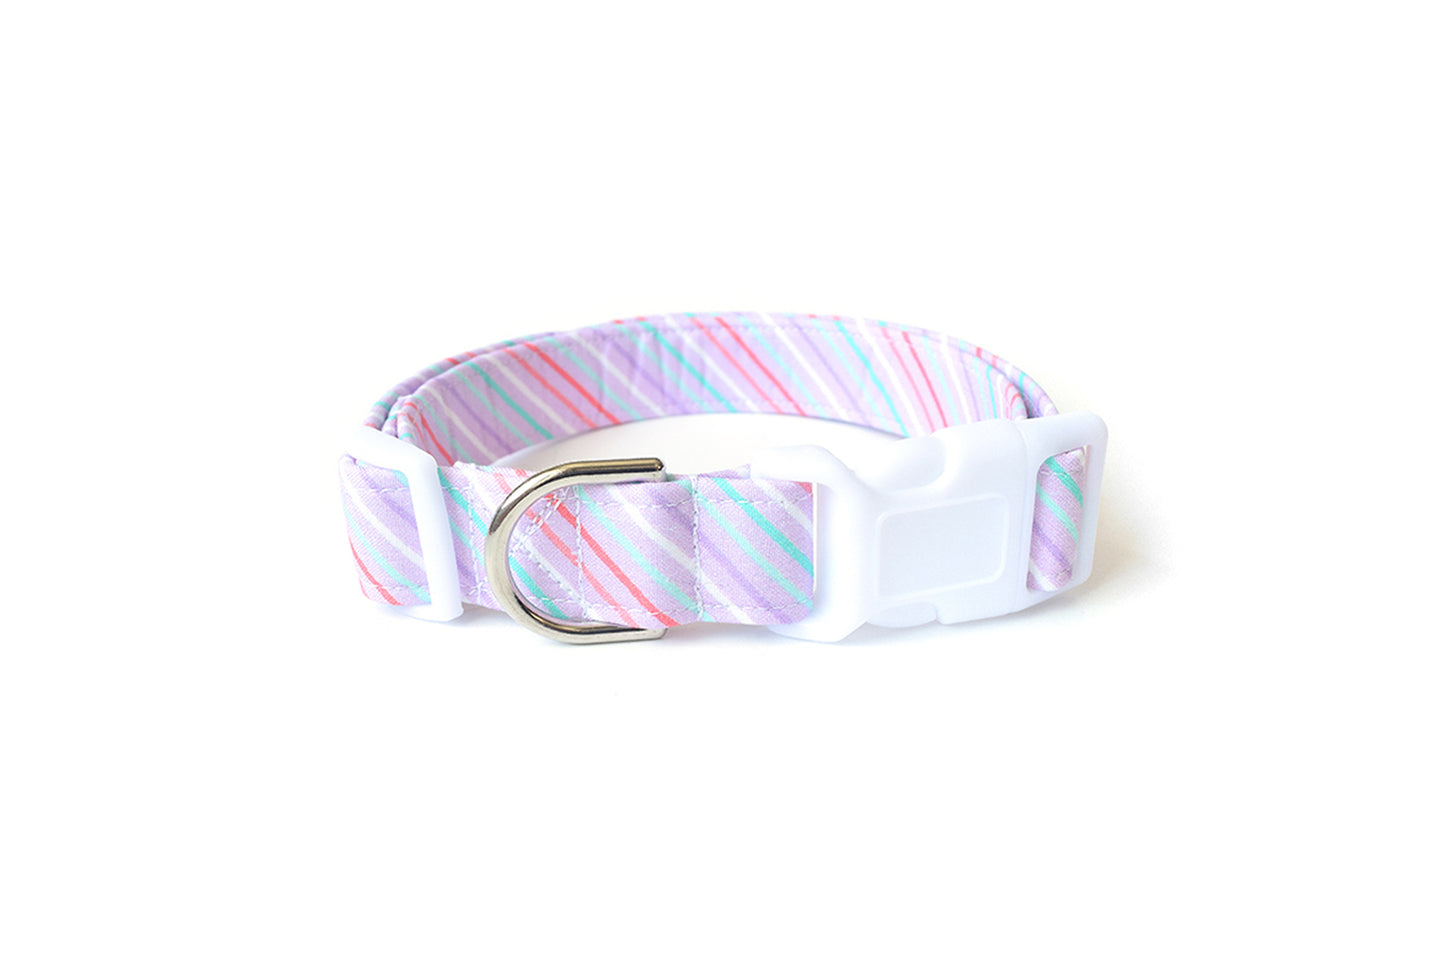 Pastel Purple Dog Collar with Pink, White & Teal Stripes - Handmade by Kira's Pet Shop